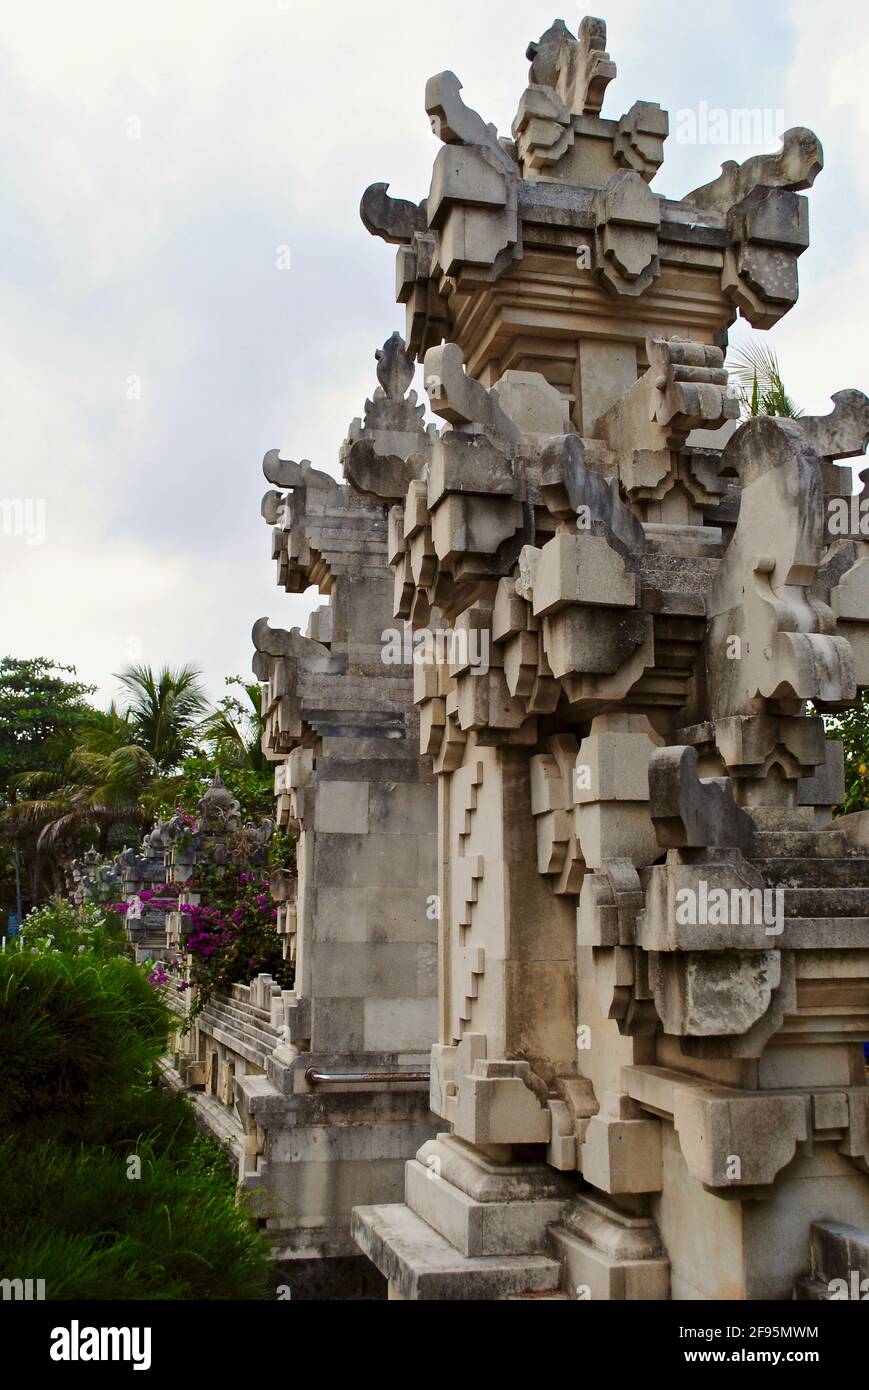 Decorative beach wall and gate in Kuta, Bali, Indonesia. The decorative feature controls beach erosion and evokes traditional Balinese architecture. Stock Photo